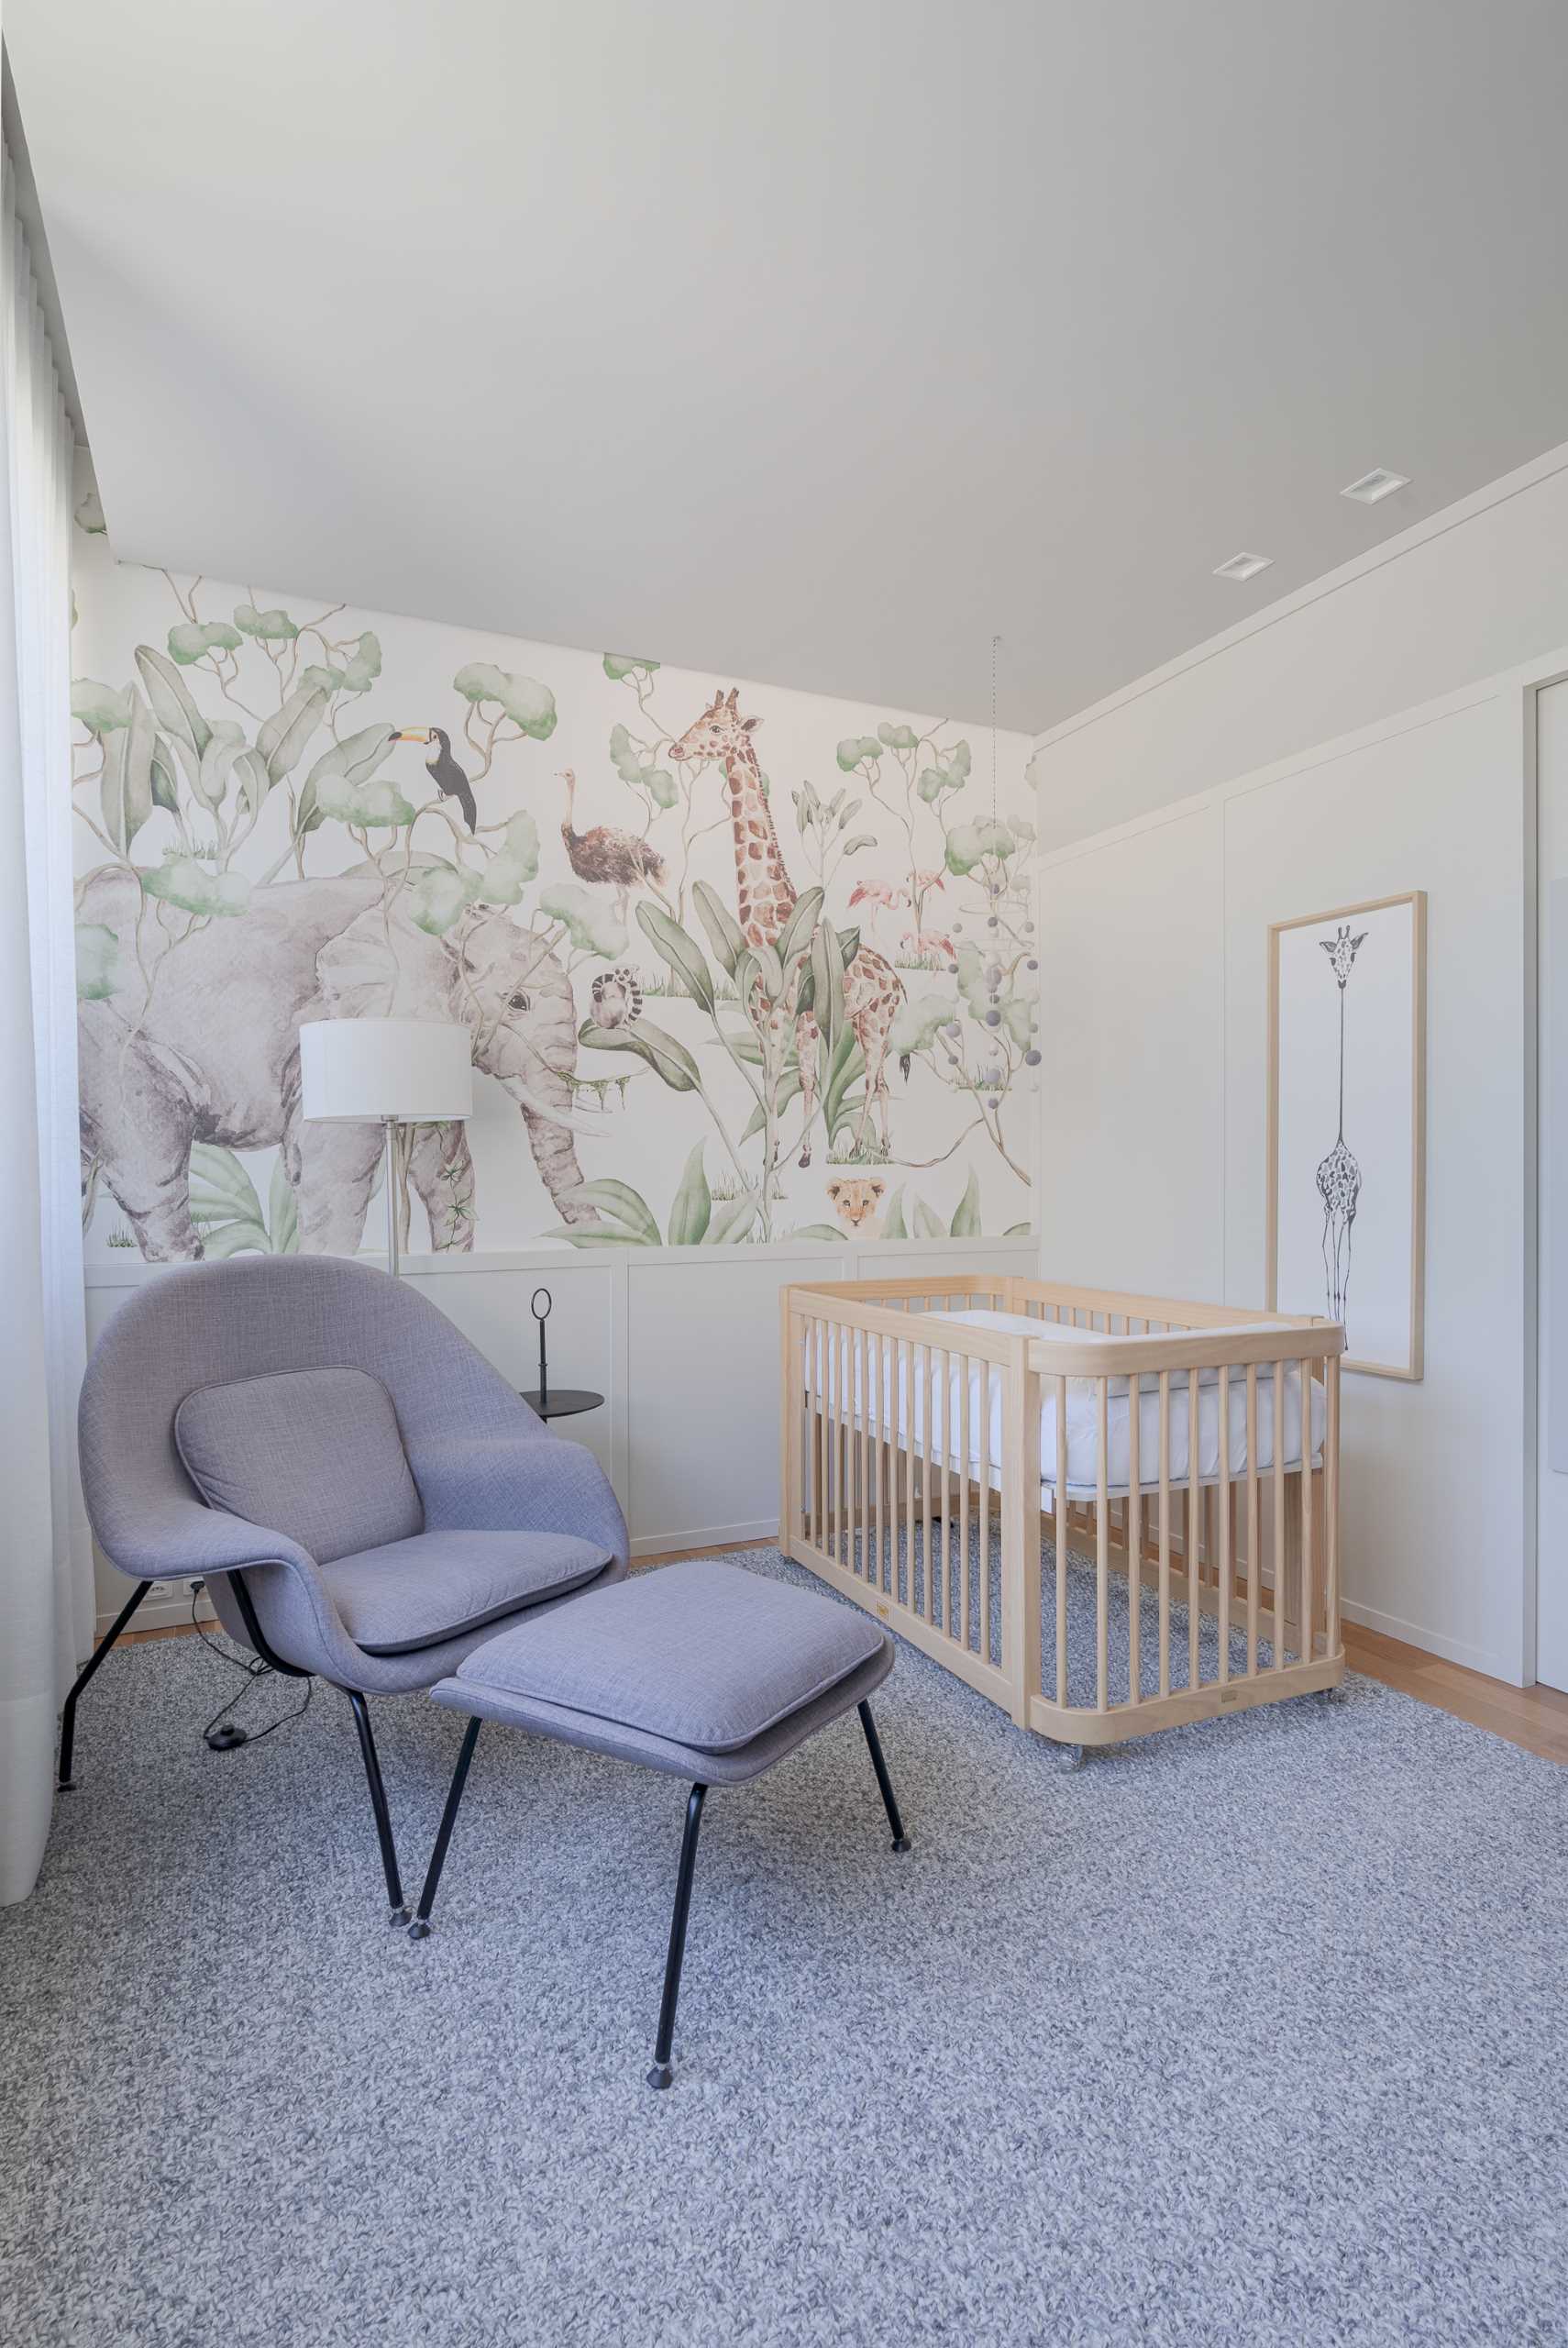 In the nursery, an large grey rug adds a soft element, while the wall showcases an animal mural.